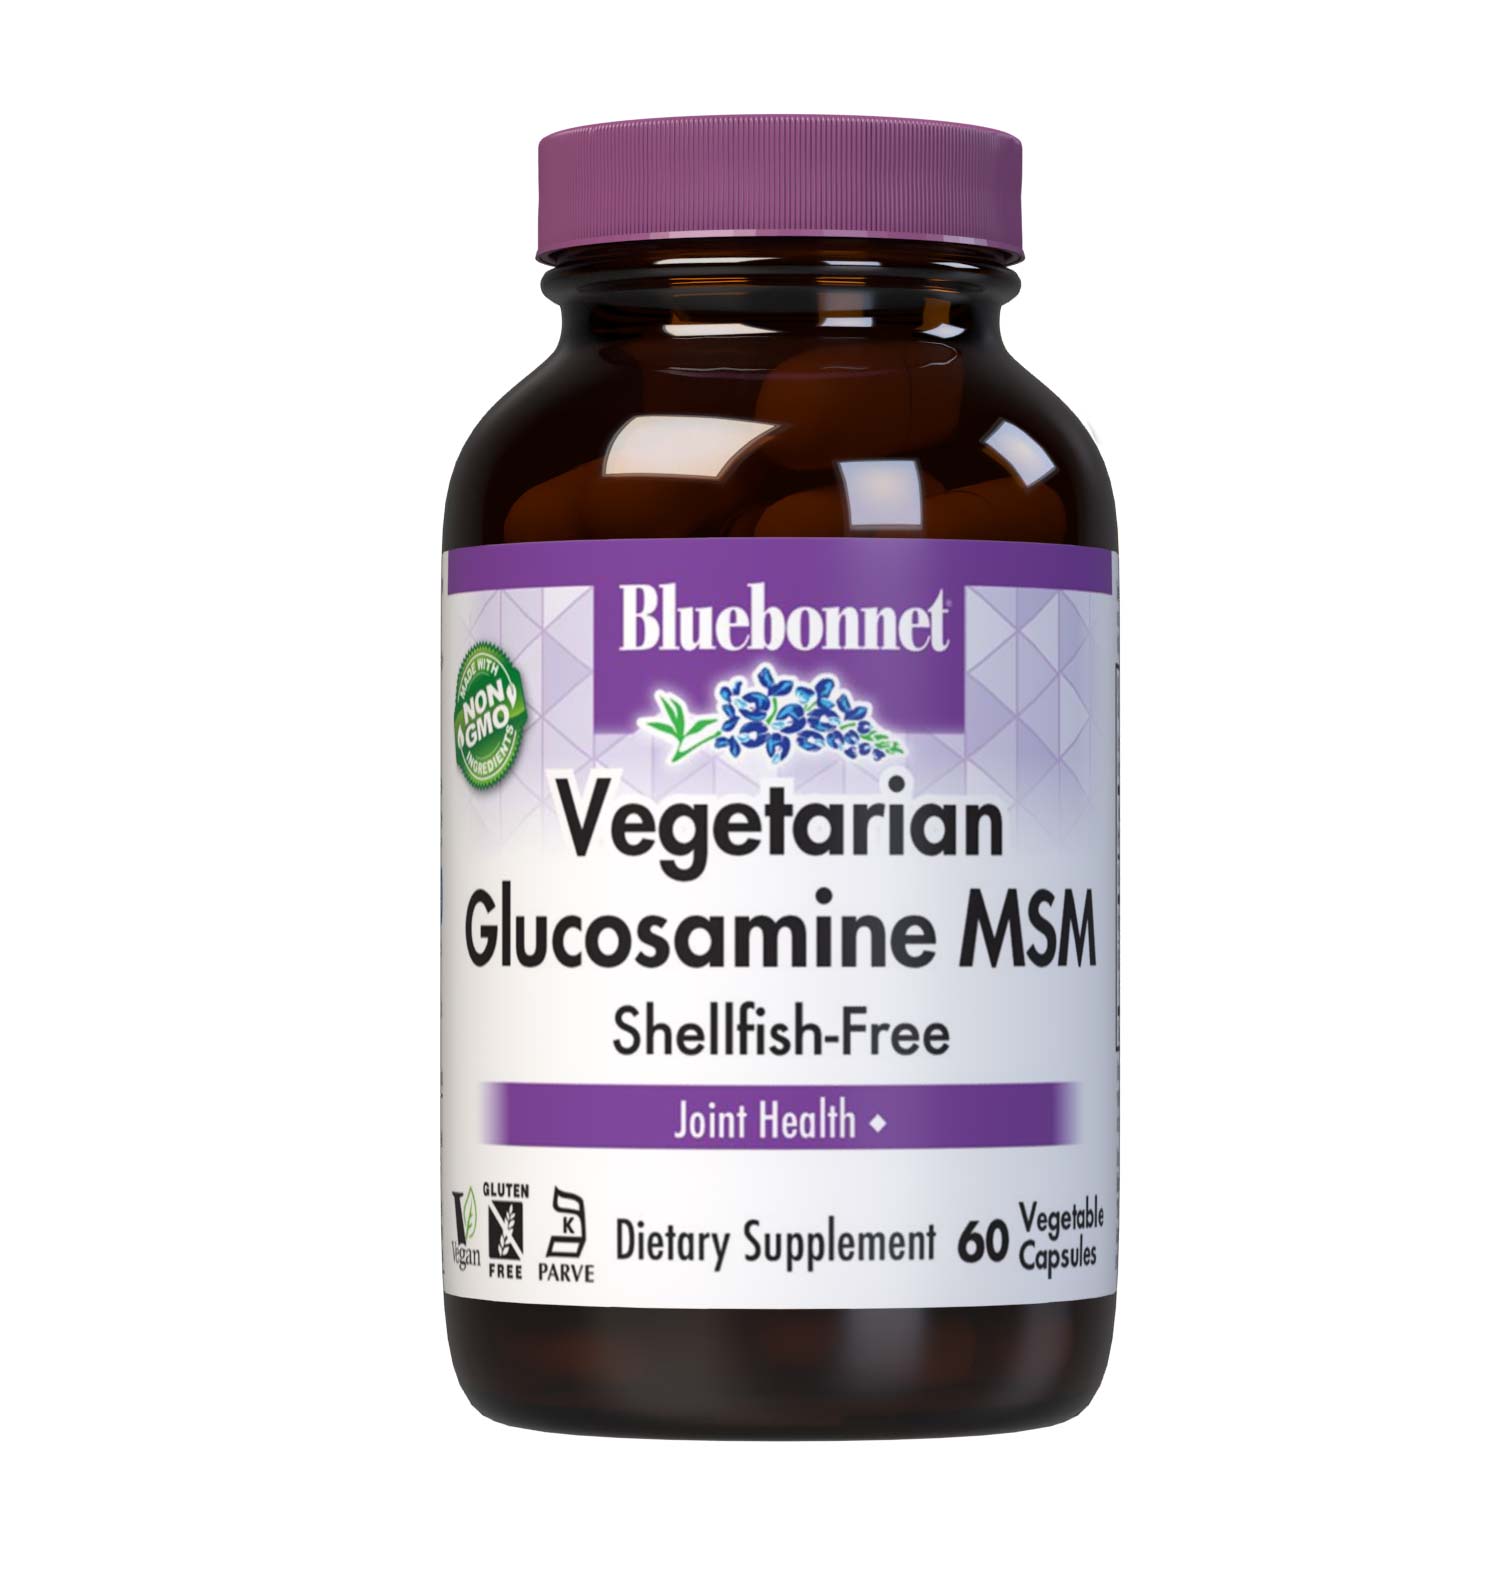 Bluebonnet’s Vegetarian Glucosamine MSM (Shellfish-Free) 60 Vegetable Capsules are formulated with a complementary, vegetarian blend of glucosamine hydrochloride known as GreenGrown and patented OptiMSM for optimal joint health. #size_60 count